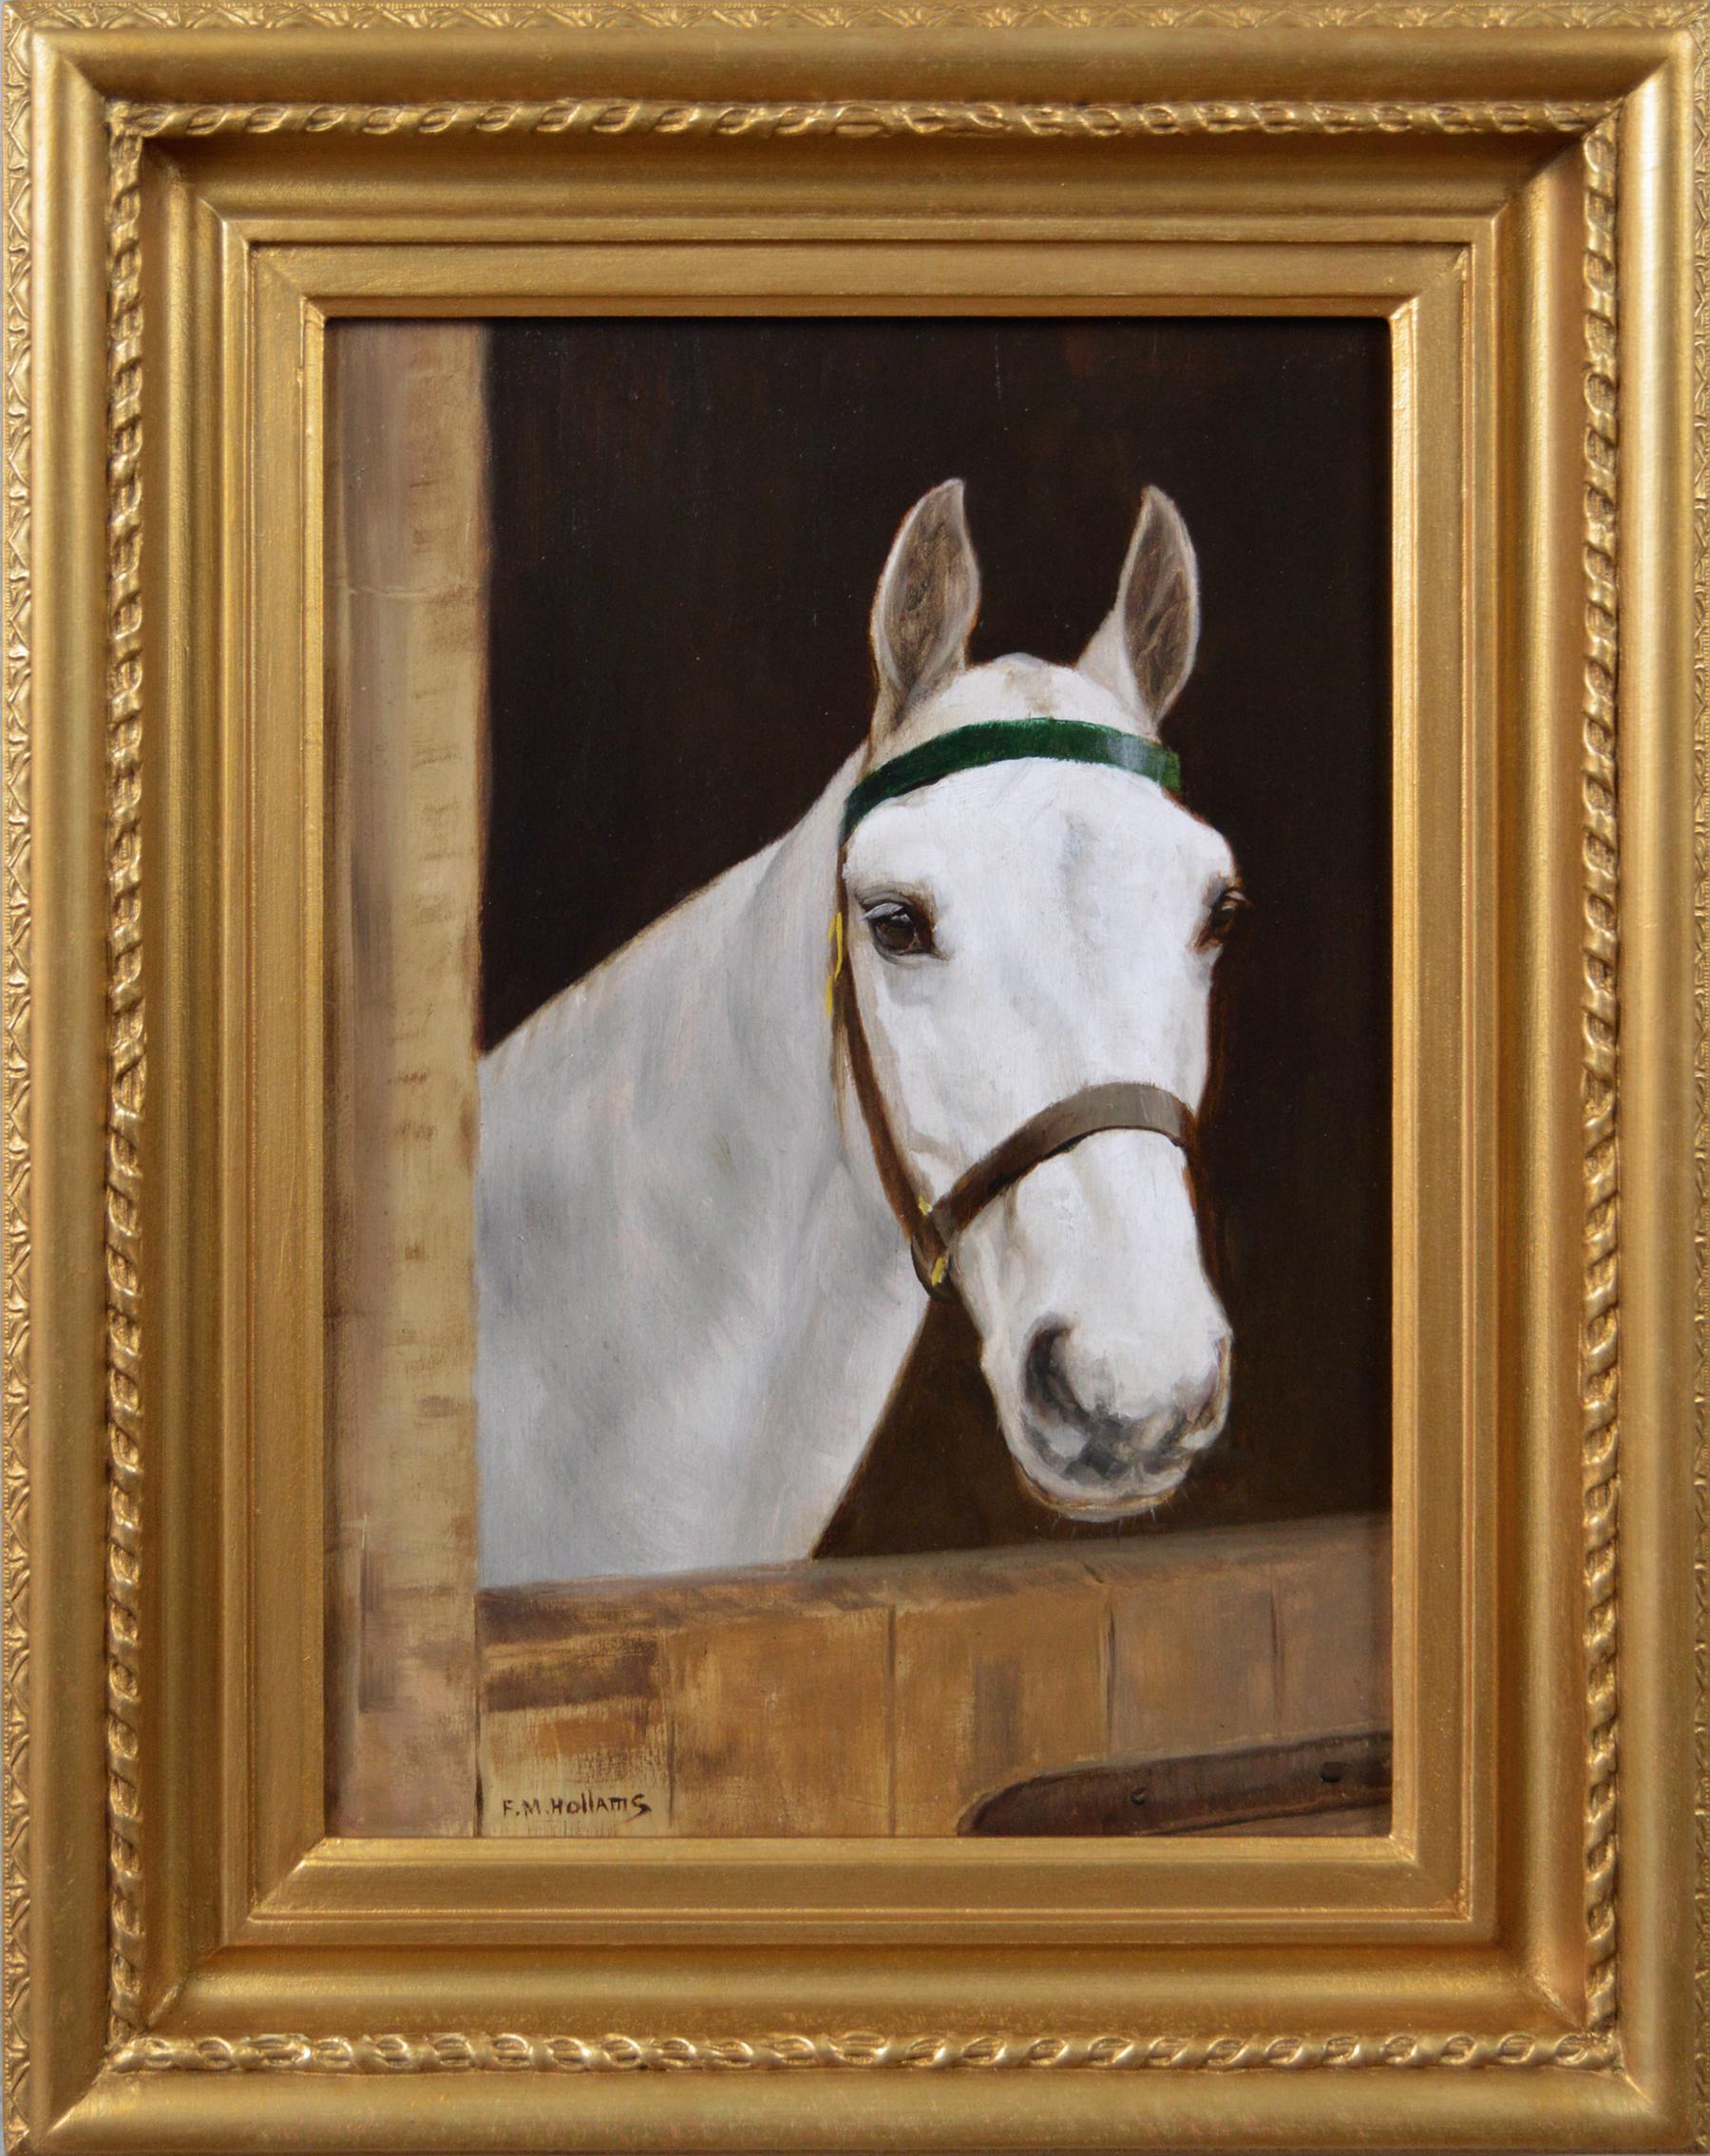 Florence Mabel Hollams Animal Painting - Equestrian portrait oil painting of a white horse at a stable door